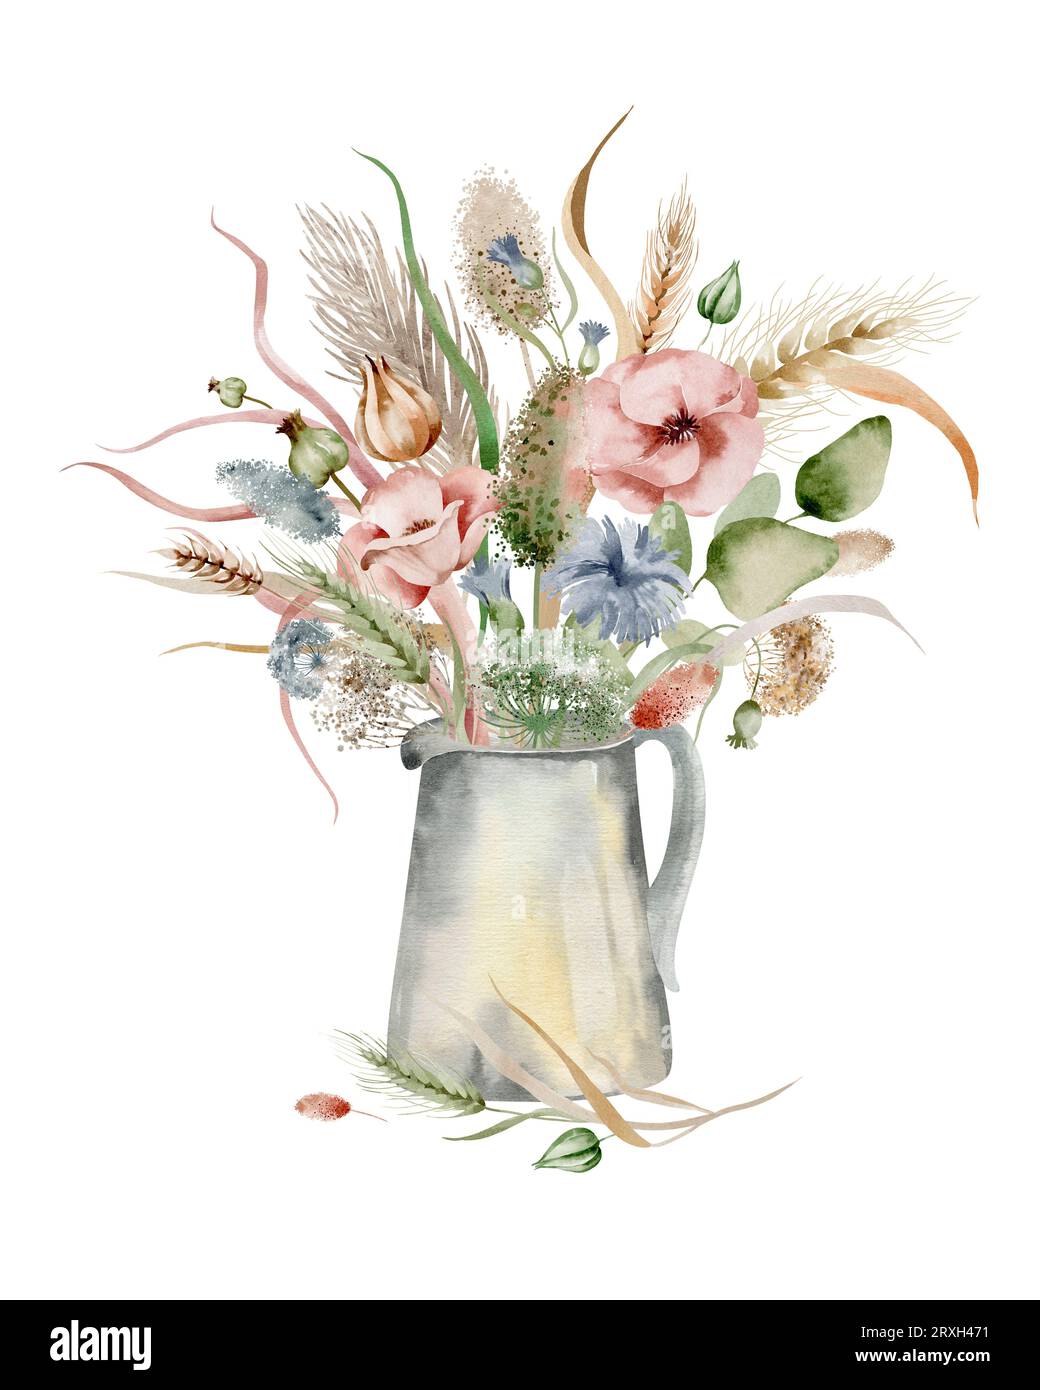 Watercolor illustration of dried flowers standing in a jug, in warm autumn colors on a white background. Stock Photo